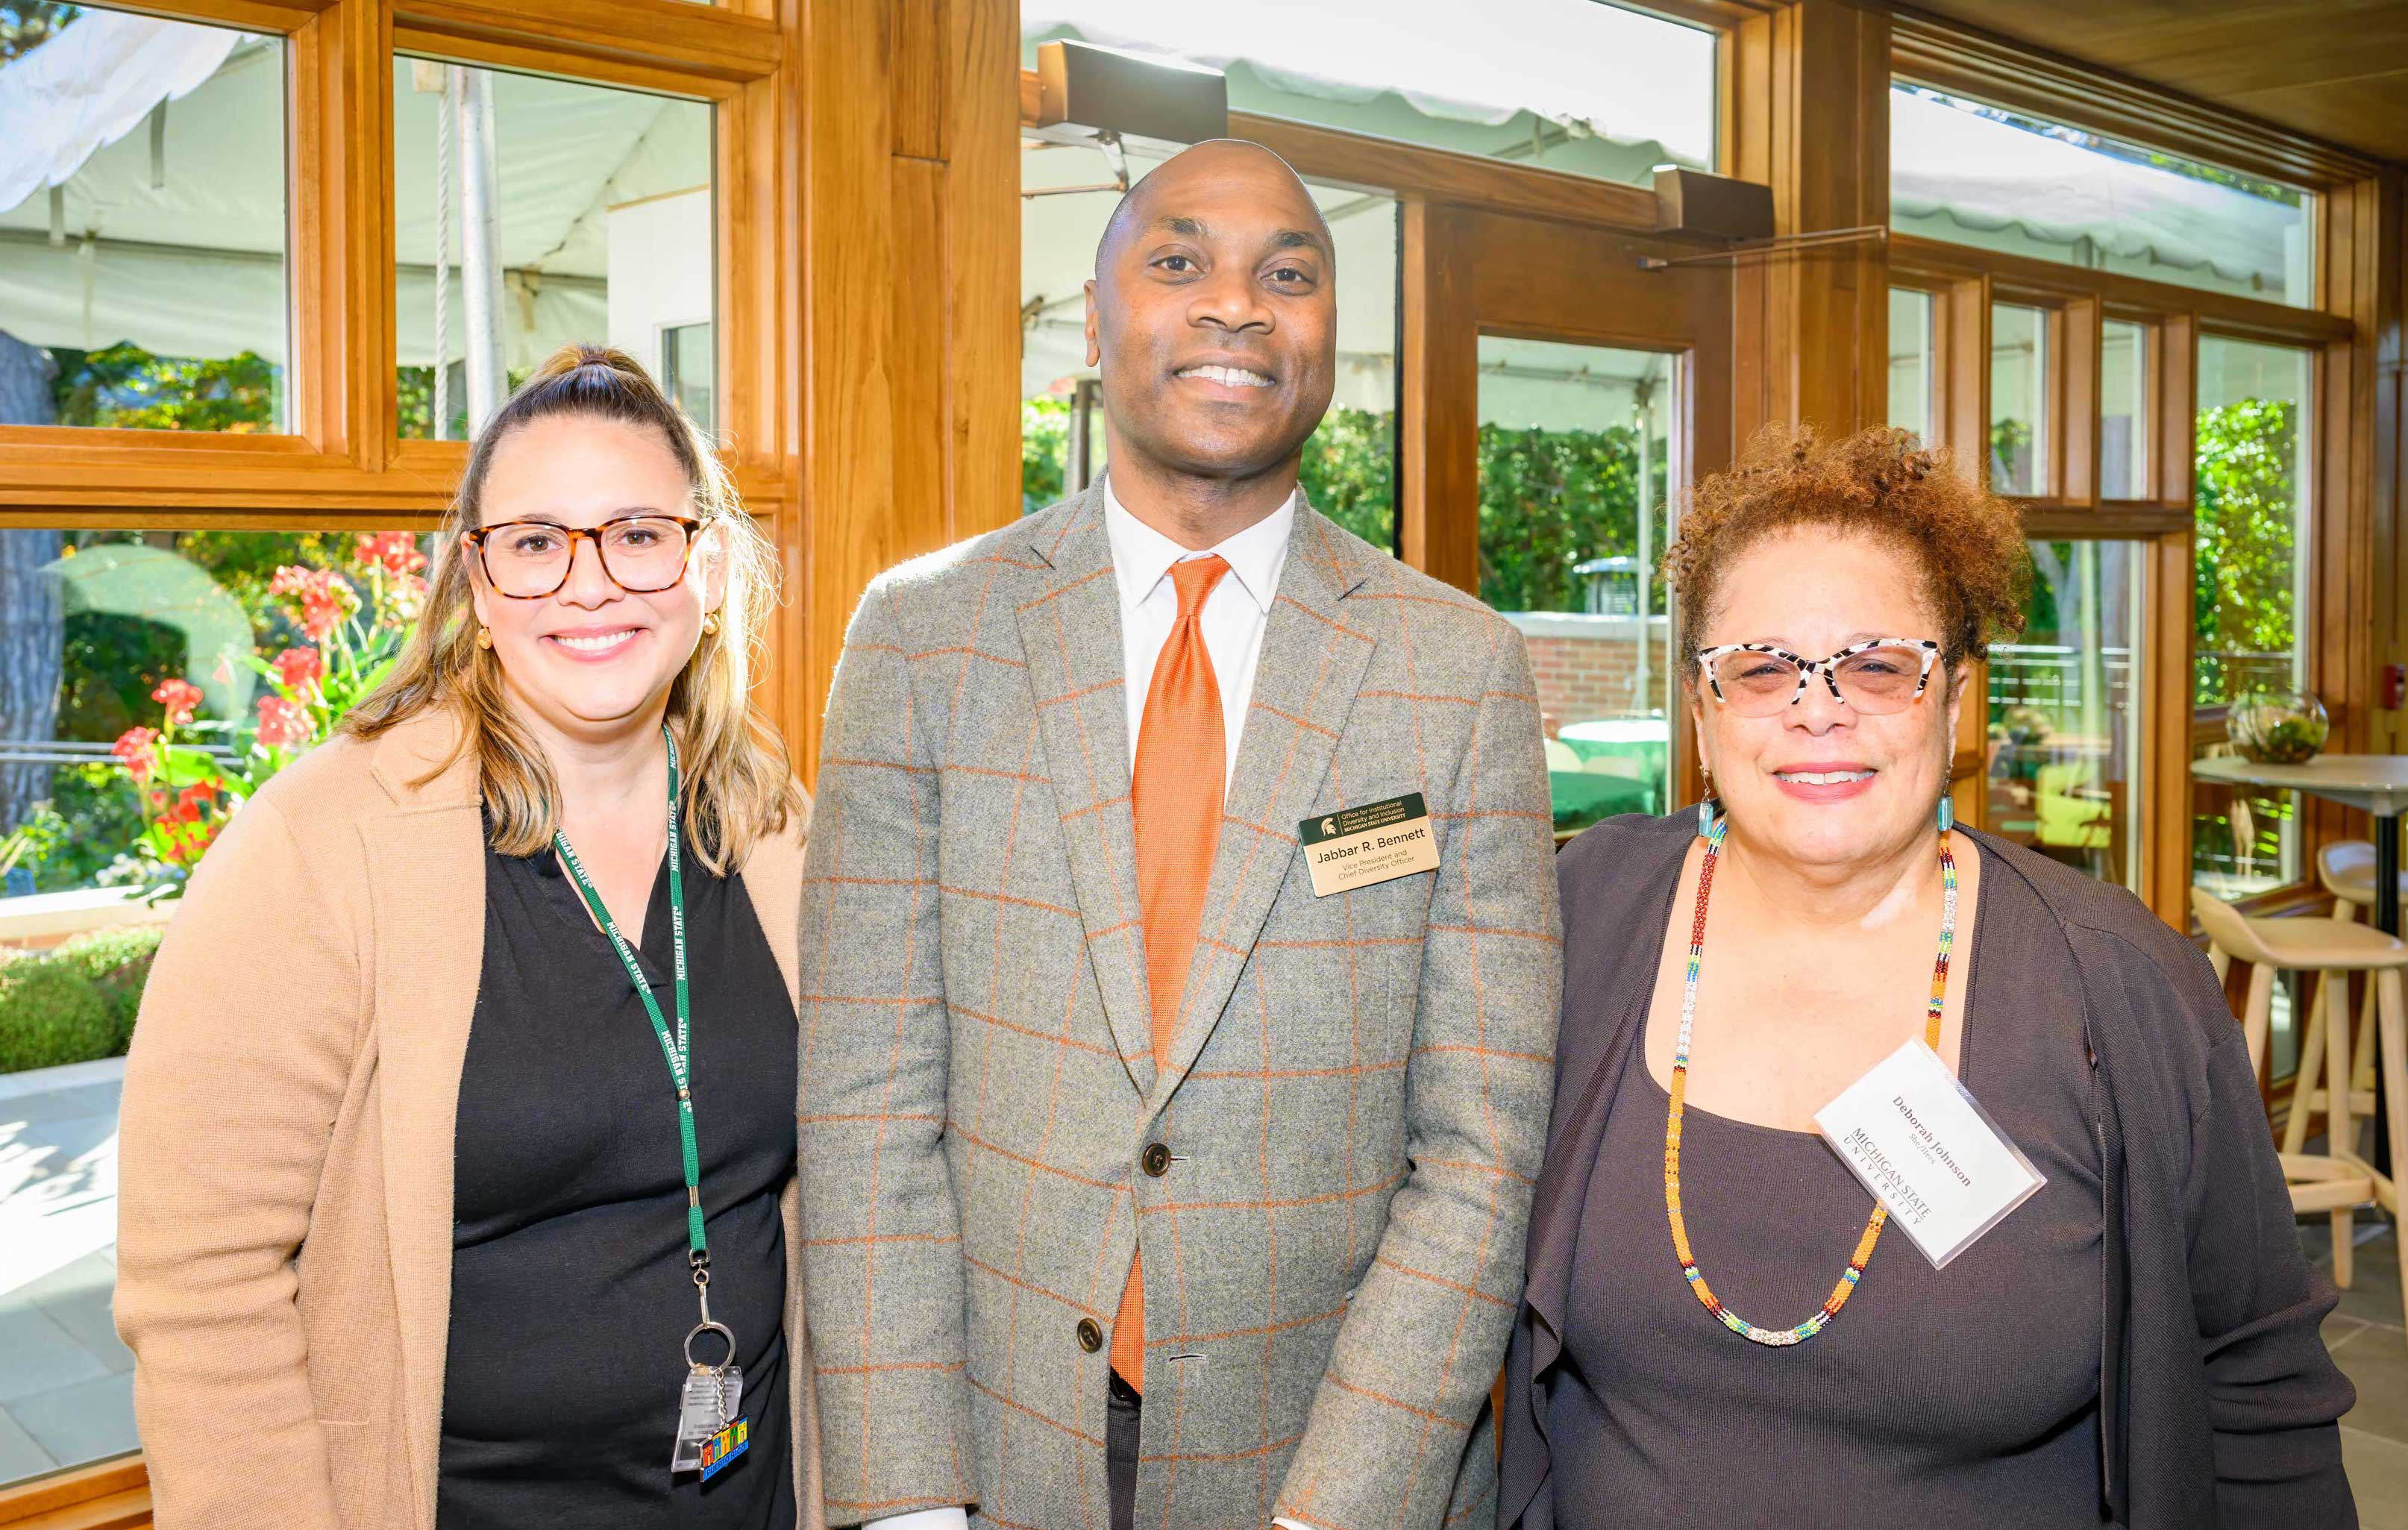 Standing from left to right, Linda Halgunseth, Ph.D., associate professor in the Department of Human Development and Family Studies, Jabbar R. Bennett, Ph.D., vice president and chief diversity officer, Deborah J. Johnson, Ph.D., director of the Diversity Research Network and MSU Foundation Professor of Human Development and Family Studies.